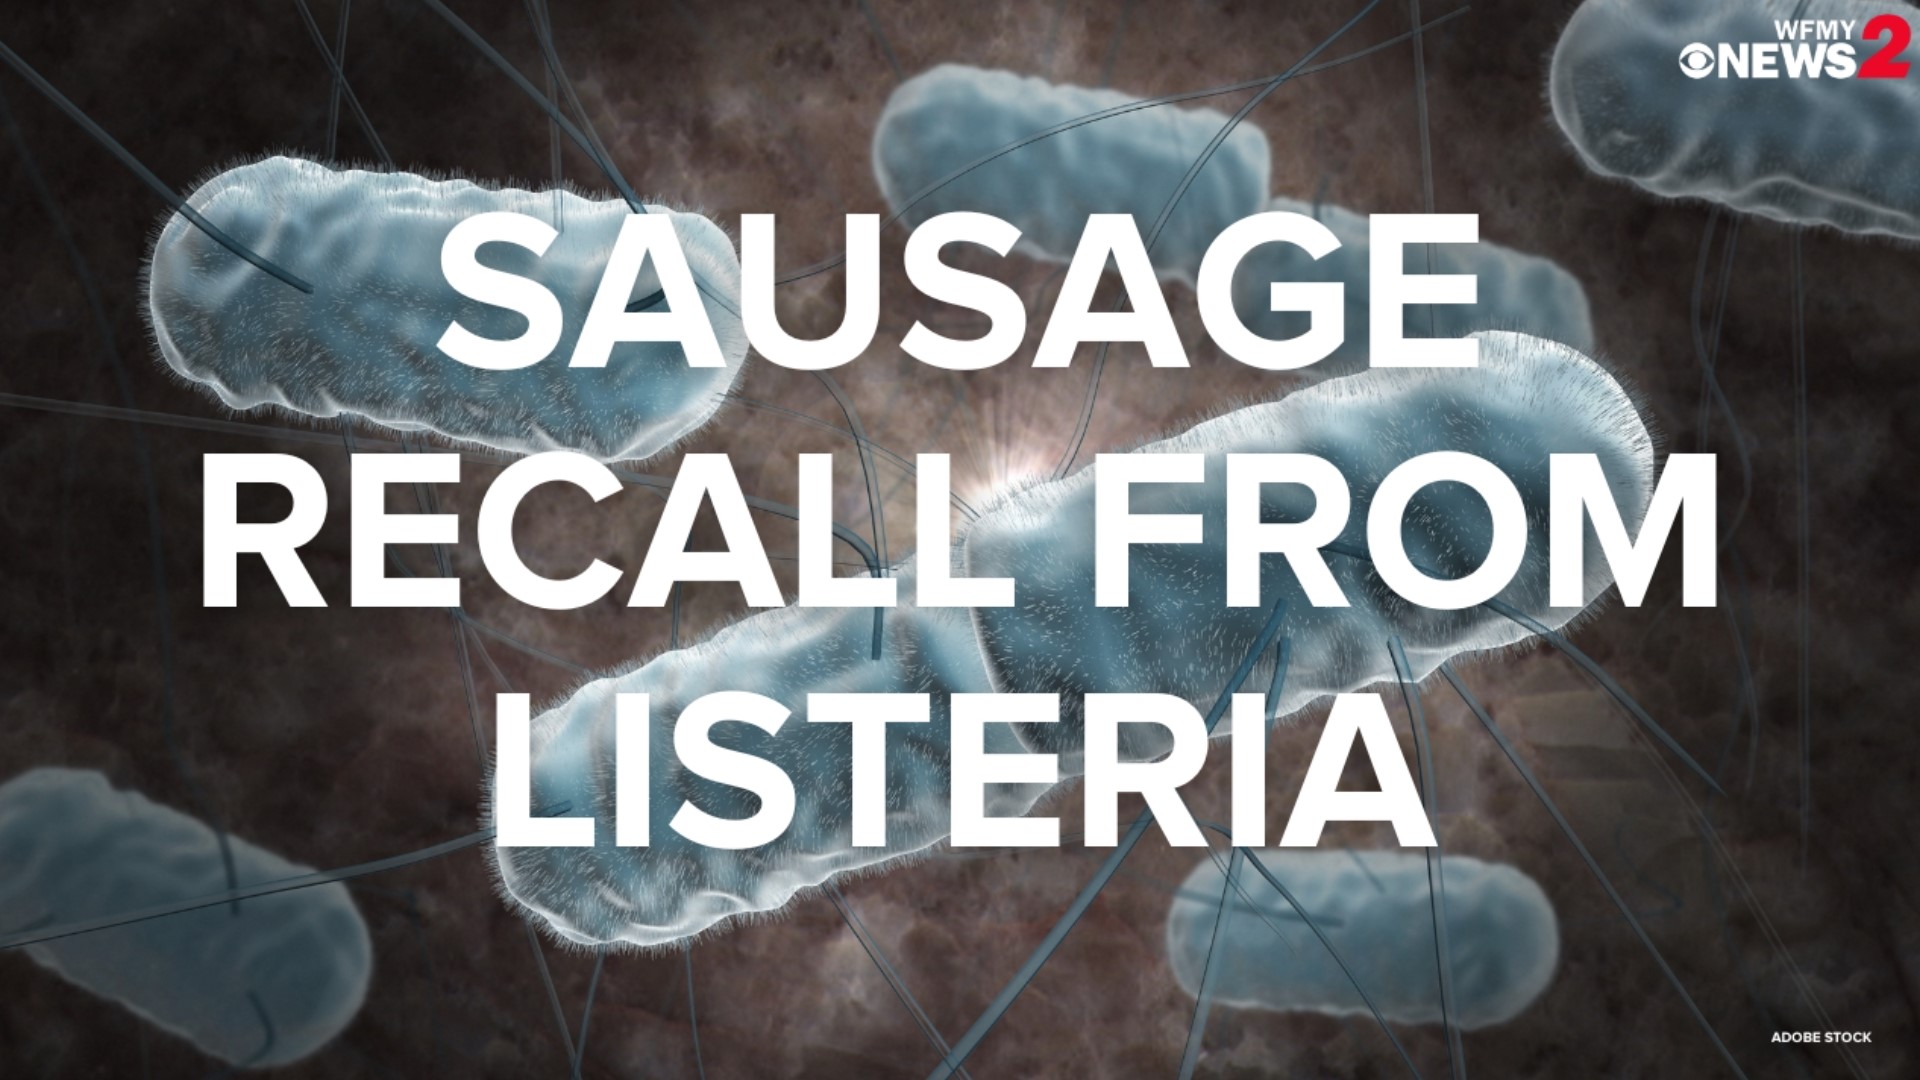 A Rhode Island company is recalling more than 50,000 pounds of ready-made sausage, including charcuterie products.